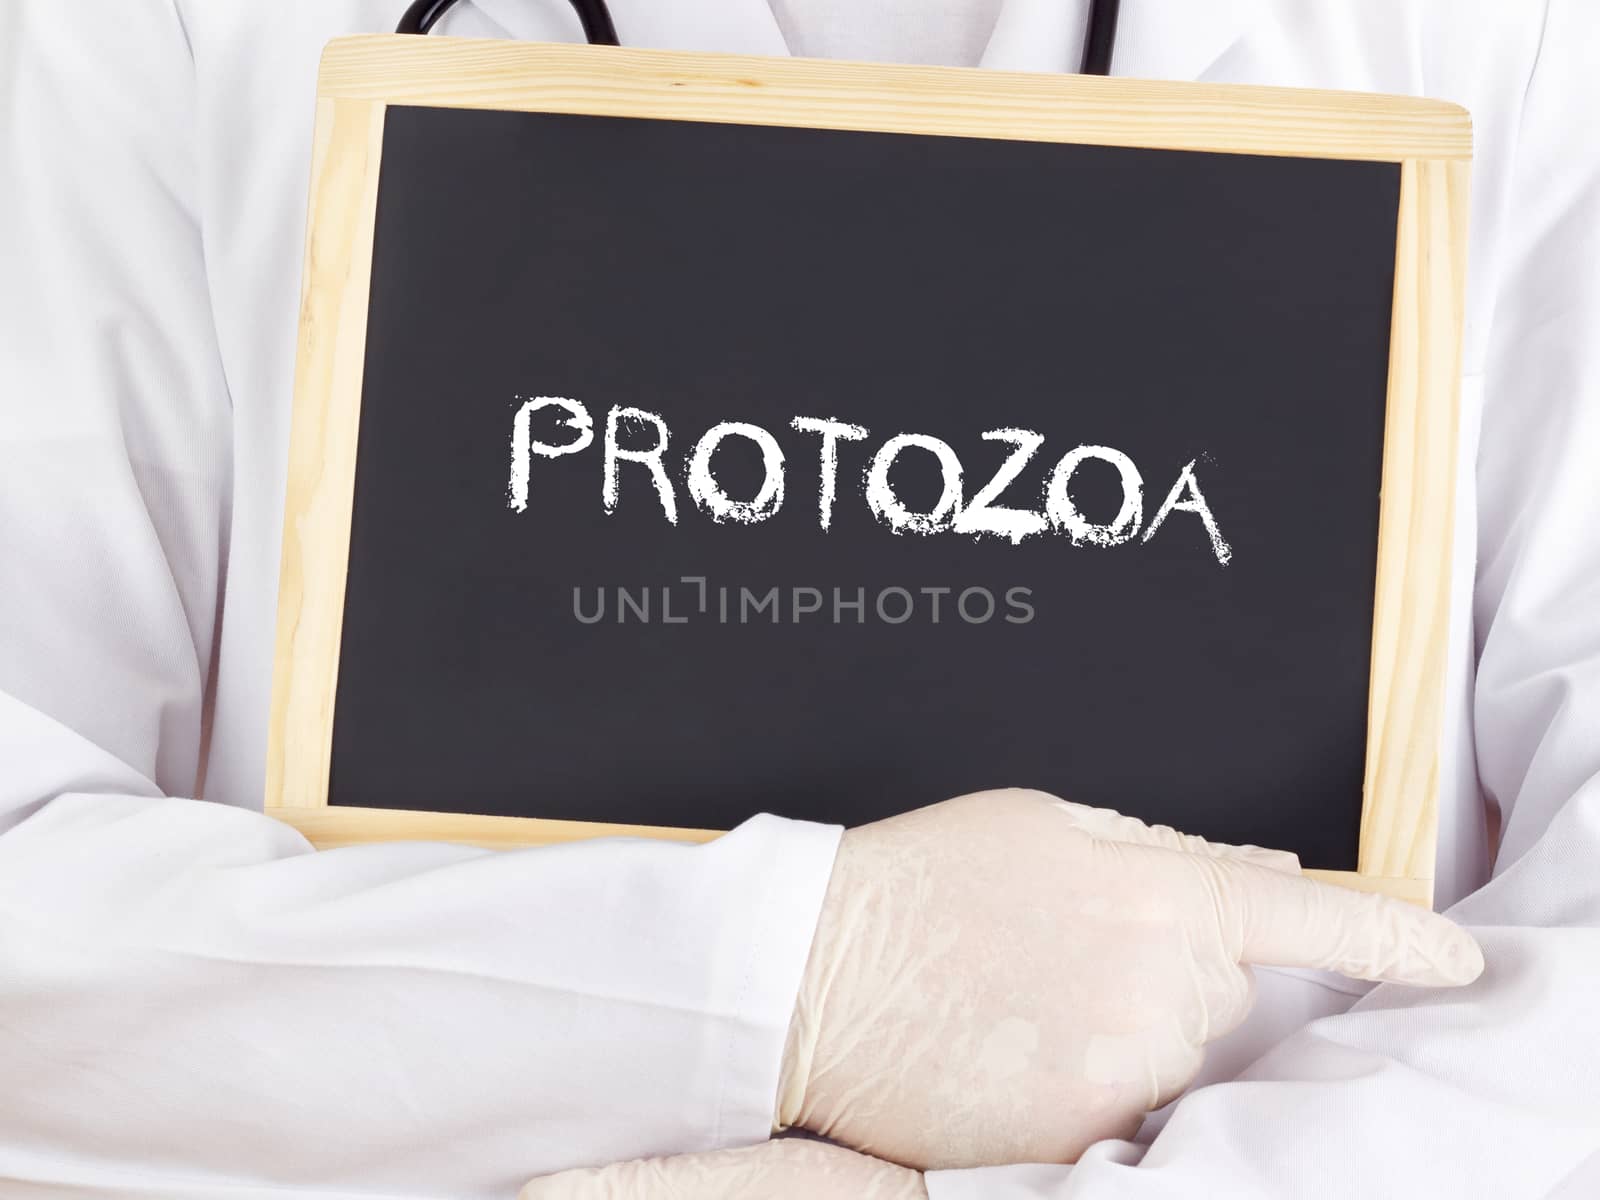 Doctor shows information: protozoa by gwolters